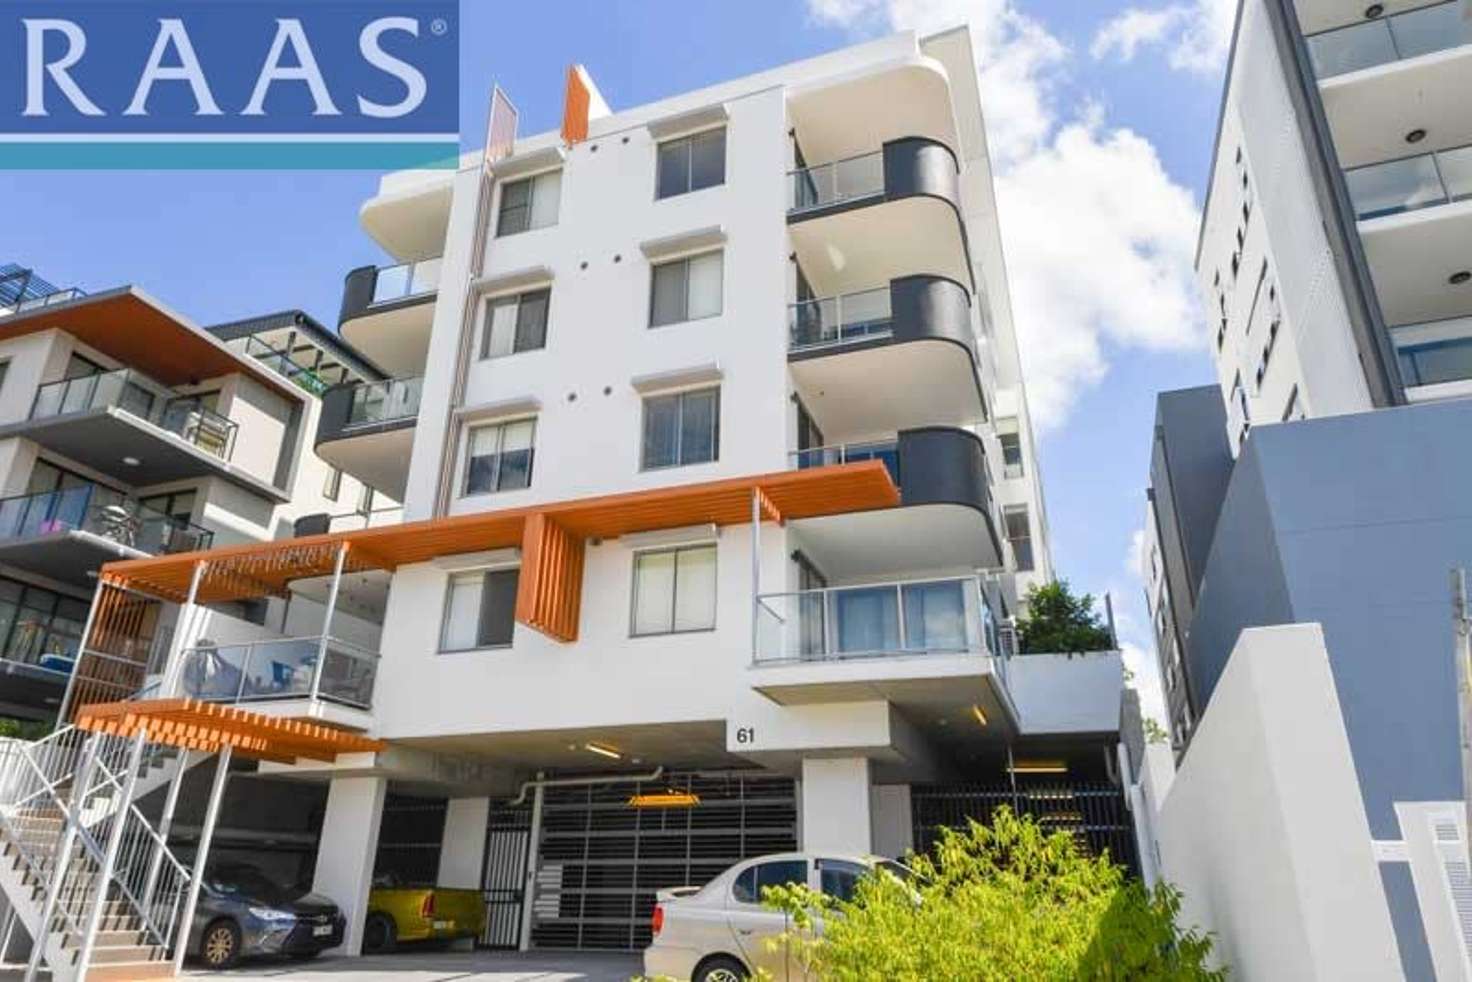 Main view of Homely apartment listing, 16/61 Ludwick street, Cannon Hill QLD 4170